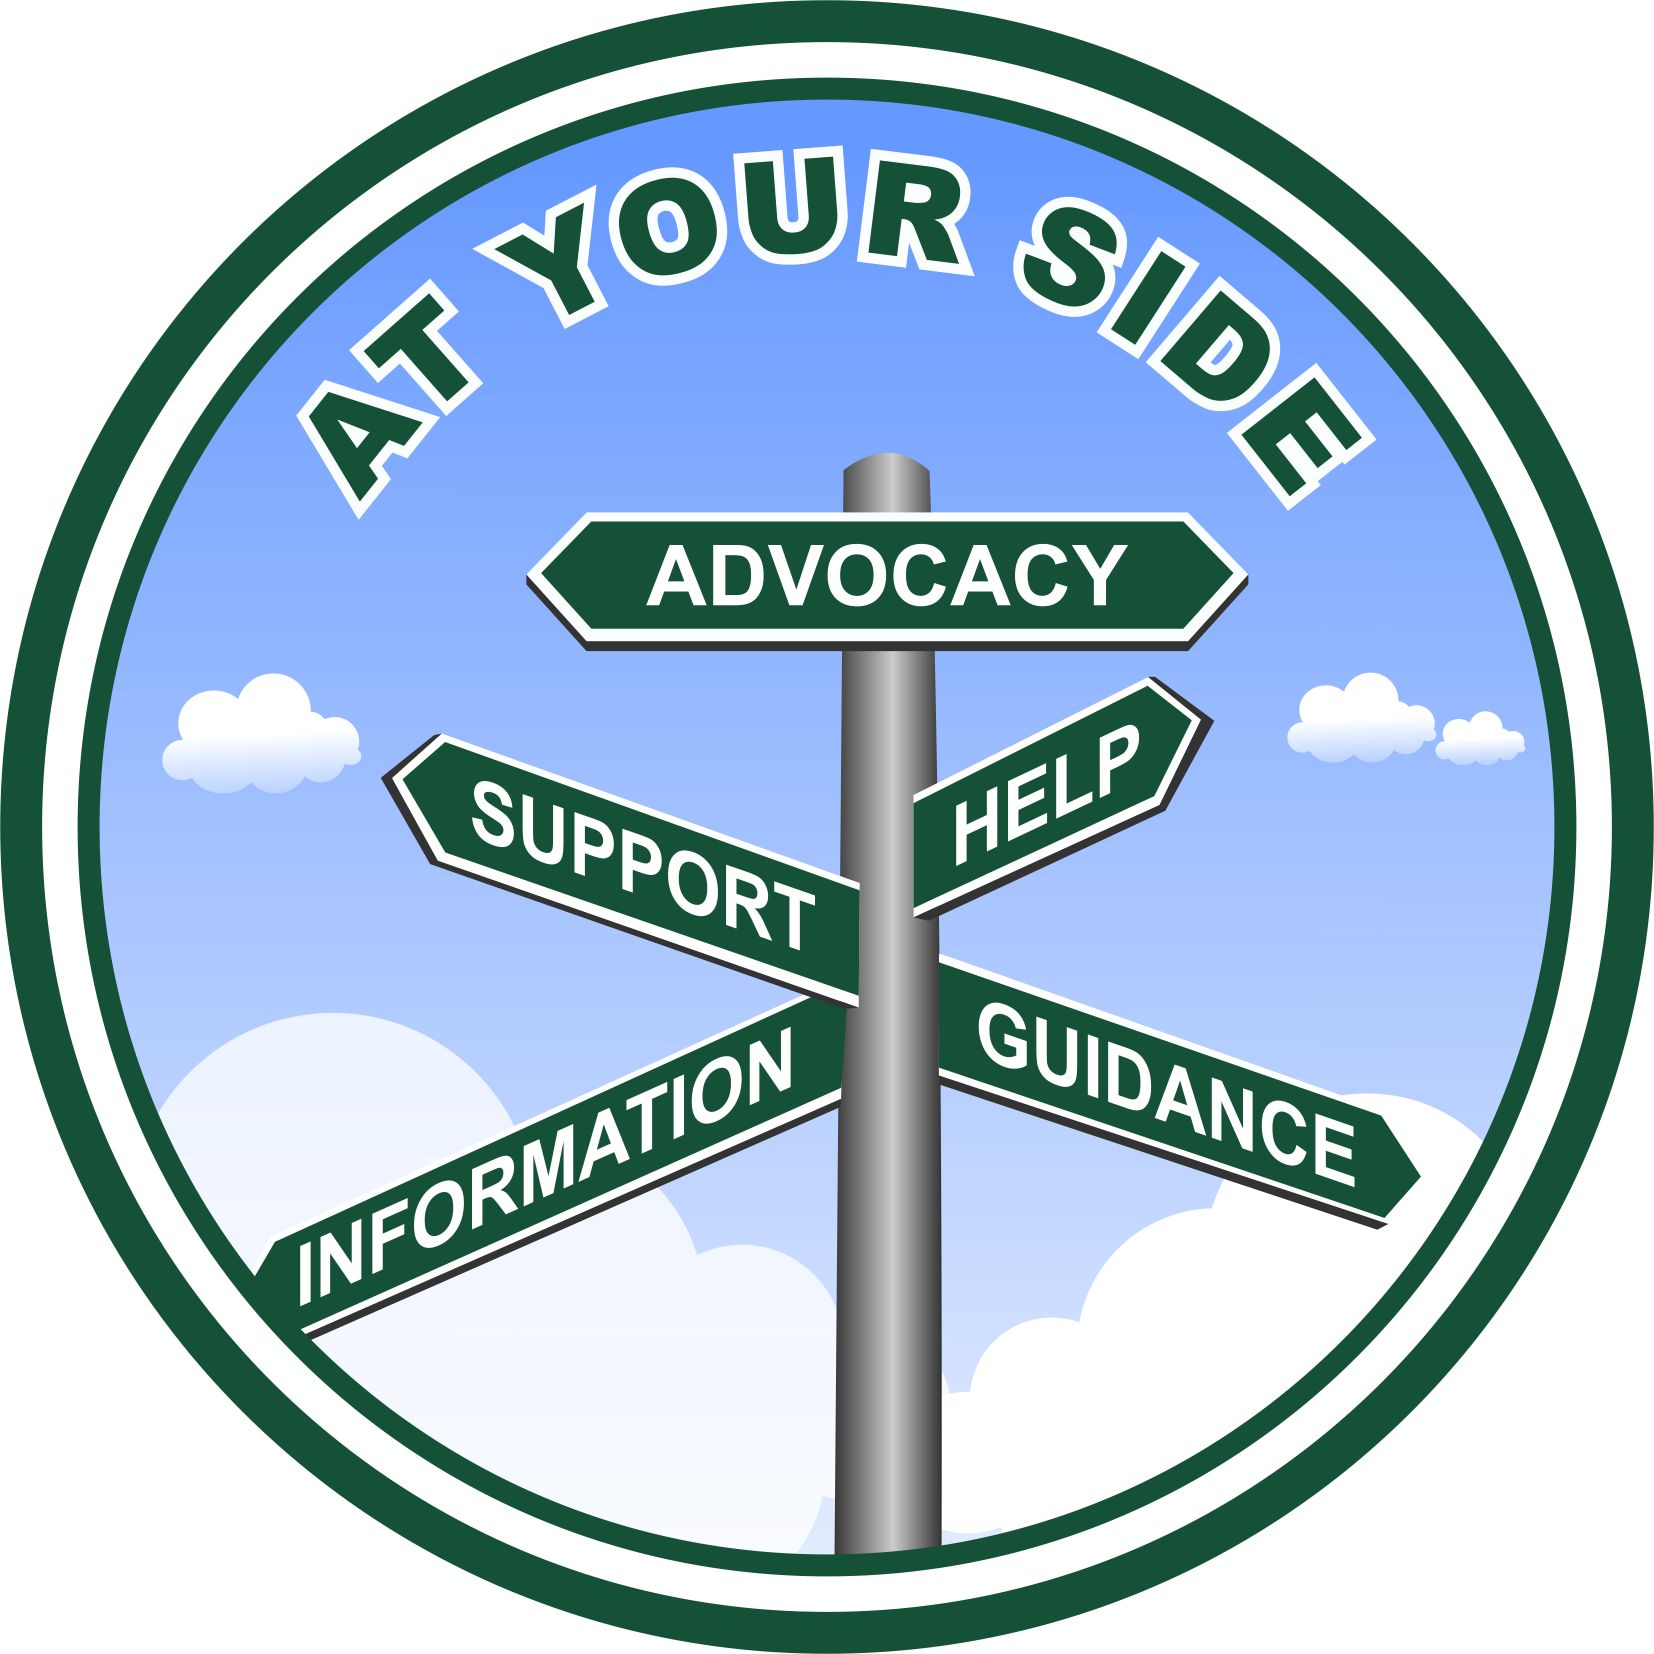 At Your Side Healthcare Advocacy